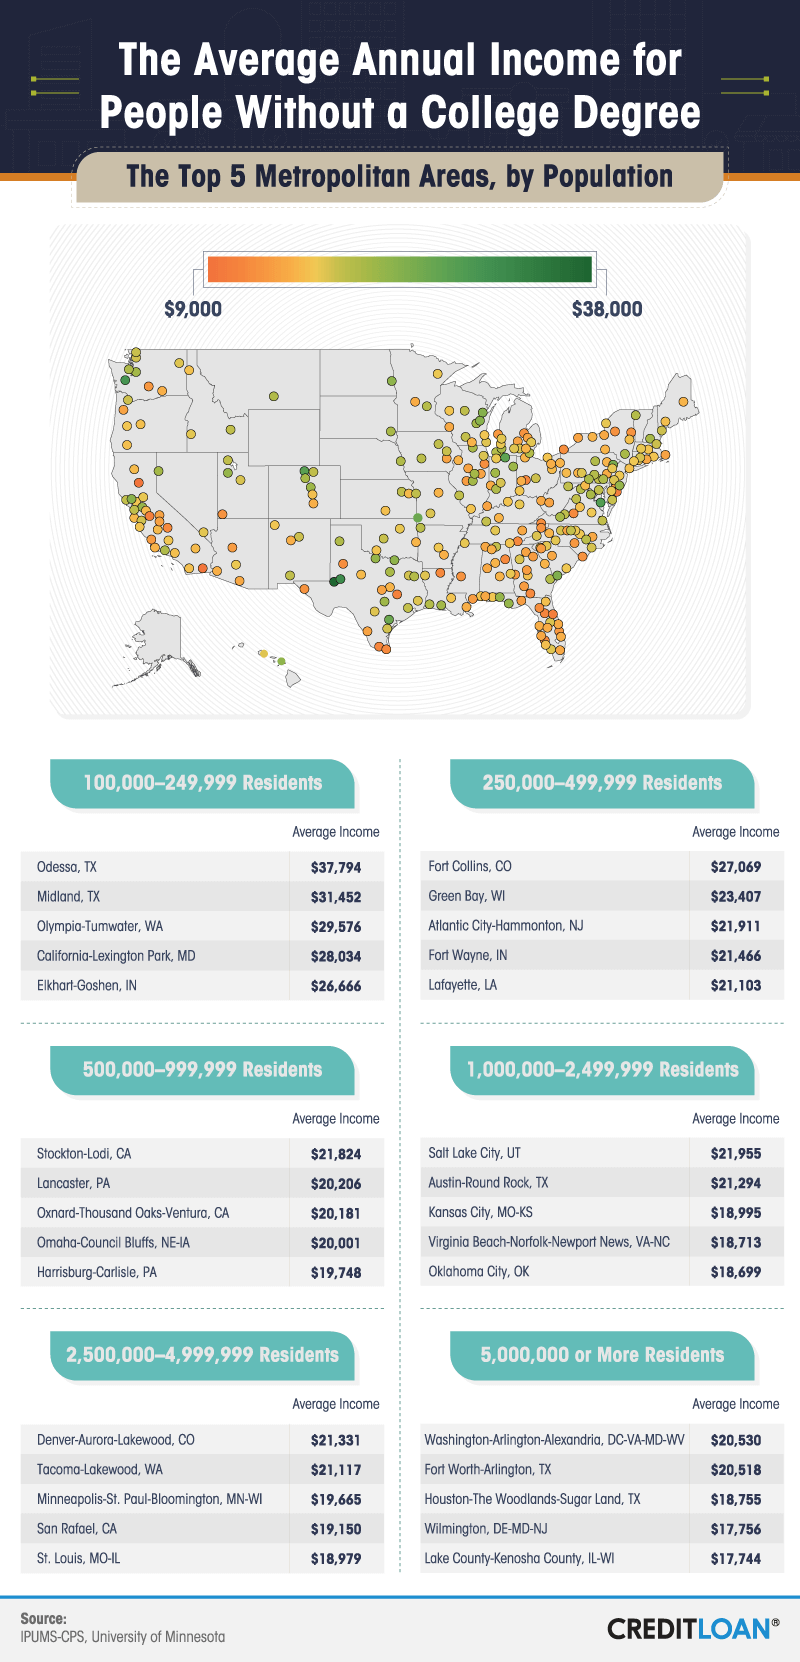 Average Annual Income for People Without a College Degree, By Metro